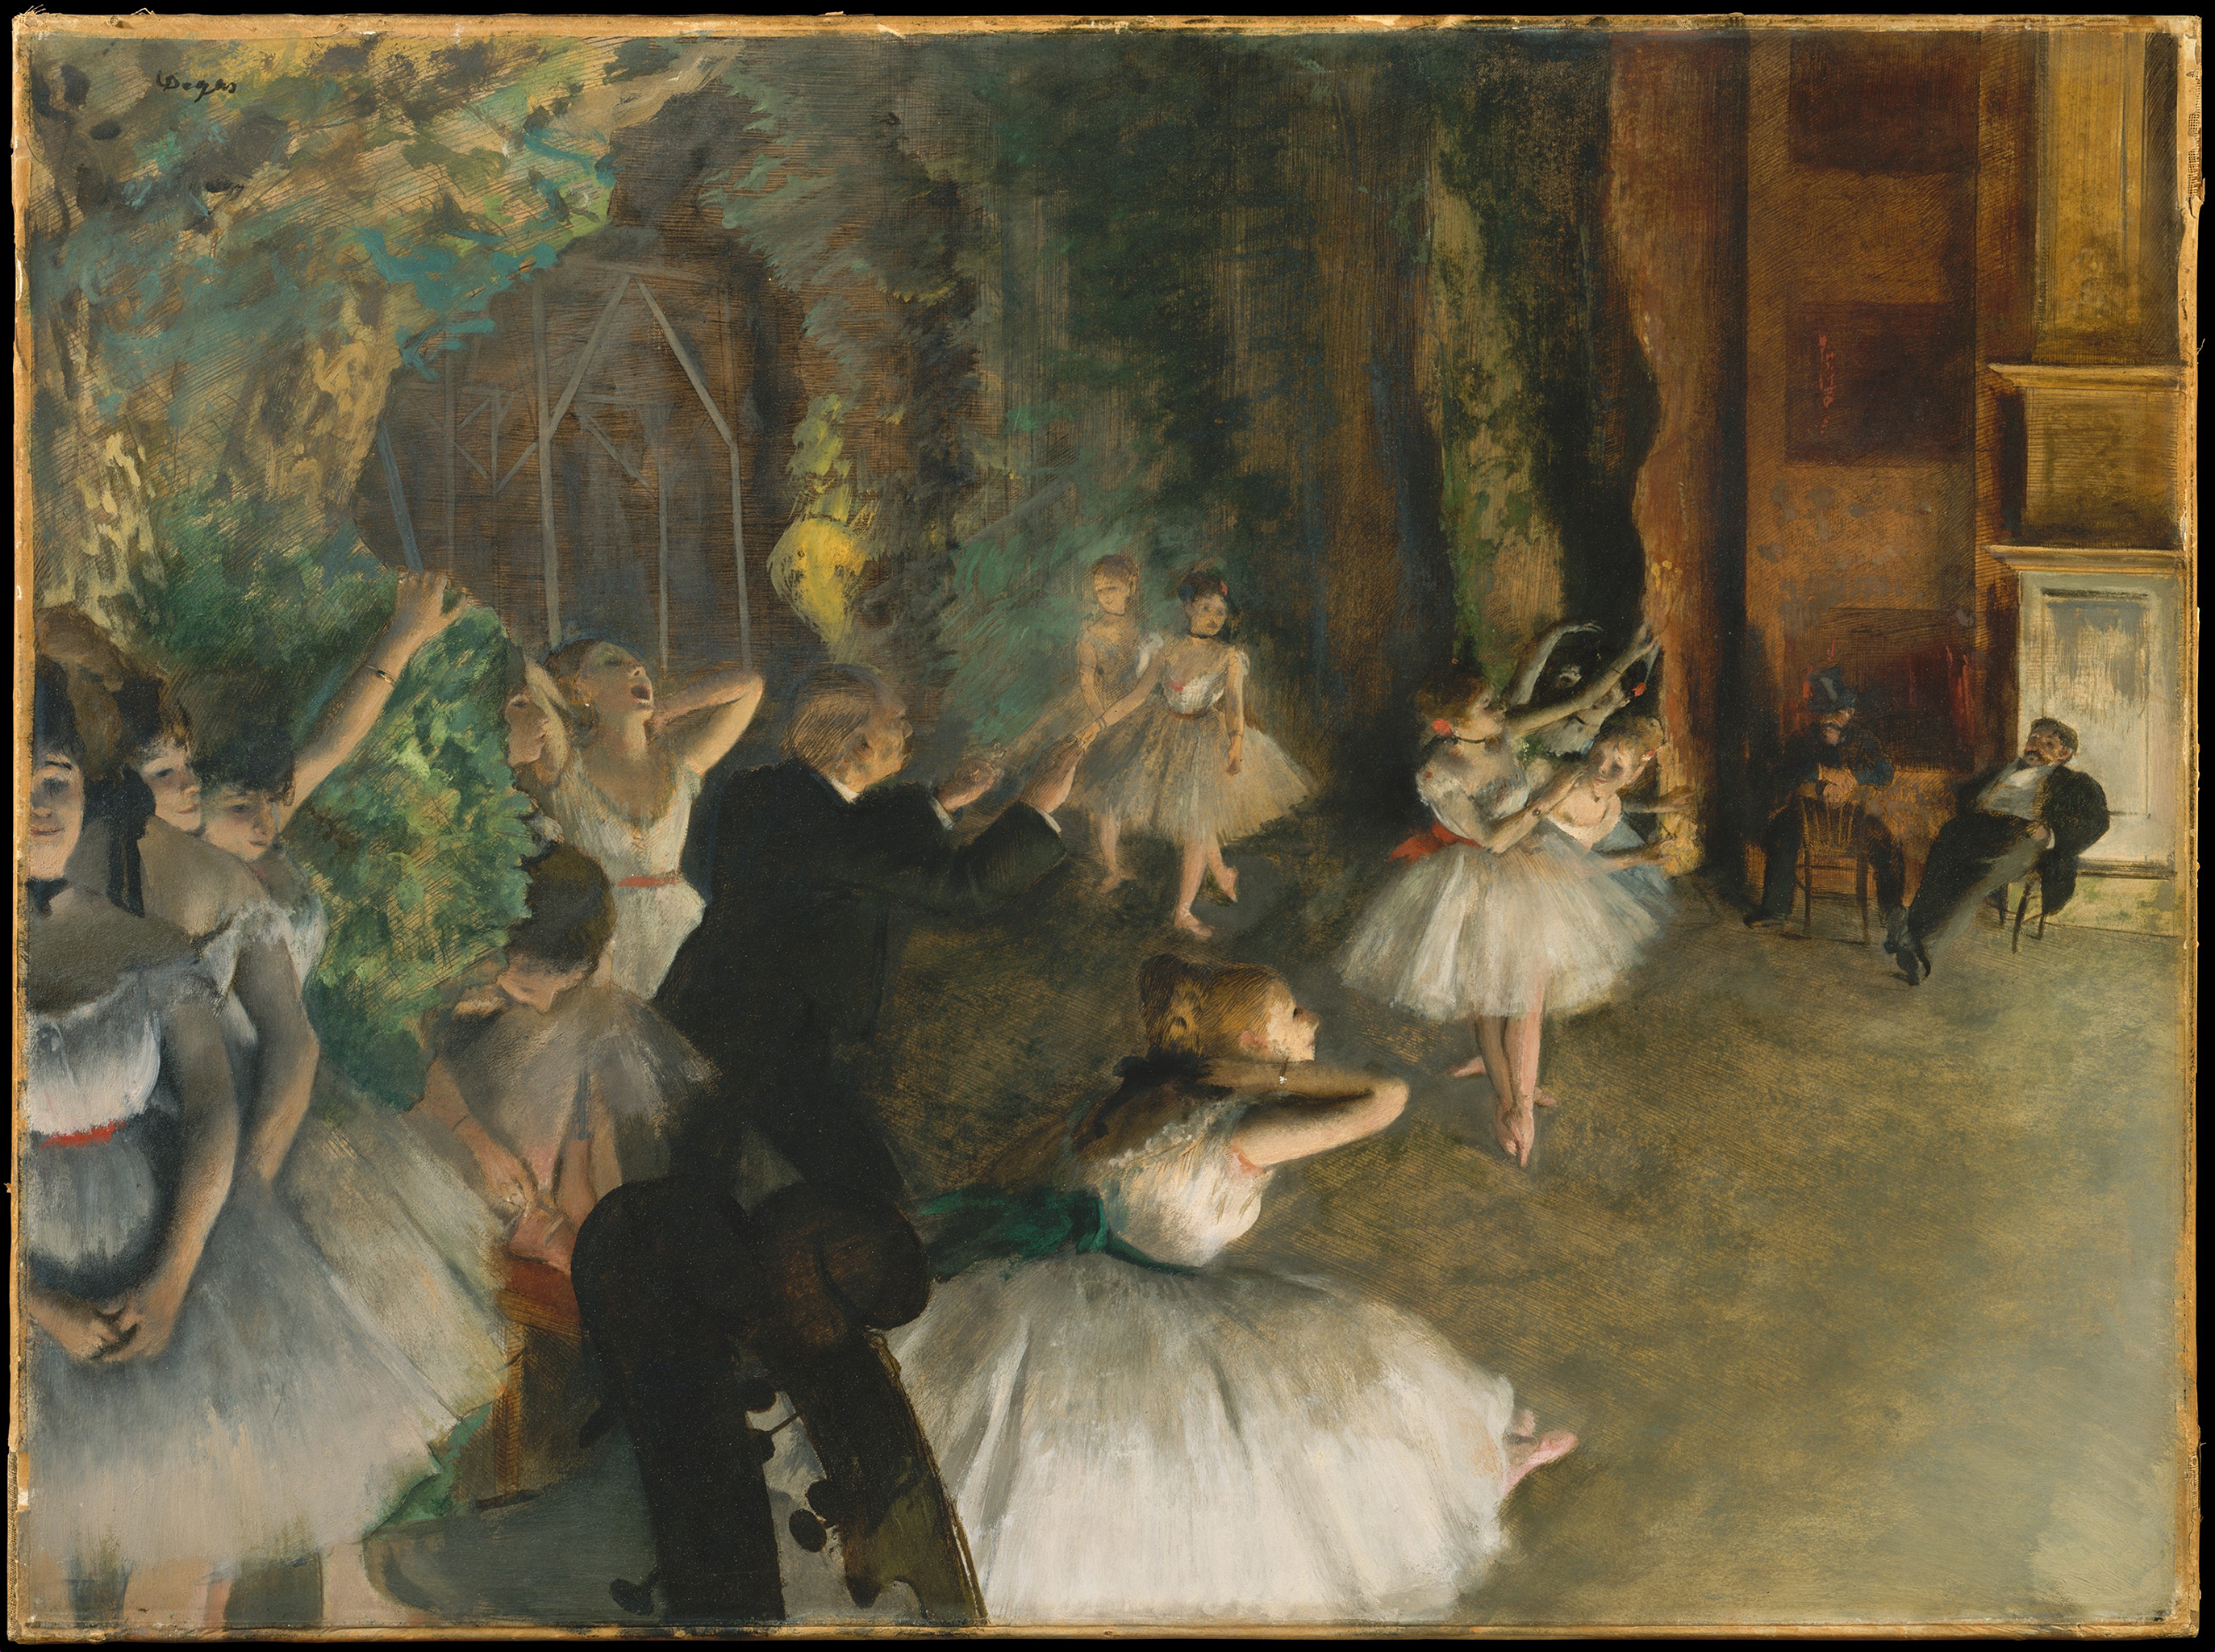 A painting depicting a large group of women wearing white tutus and dancing along a wooden floor. Among, them is man with a black suit directing them. To the right two other men sit on wooden chairs and watch.